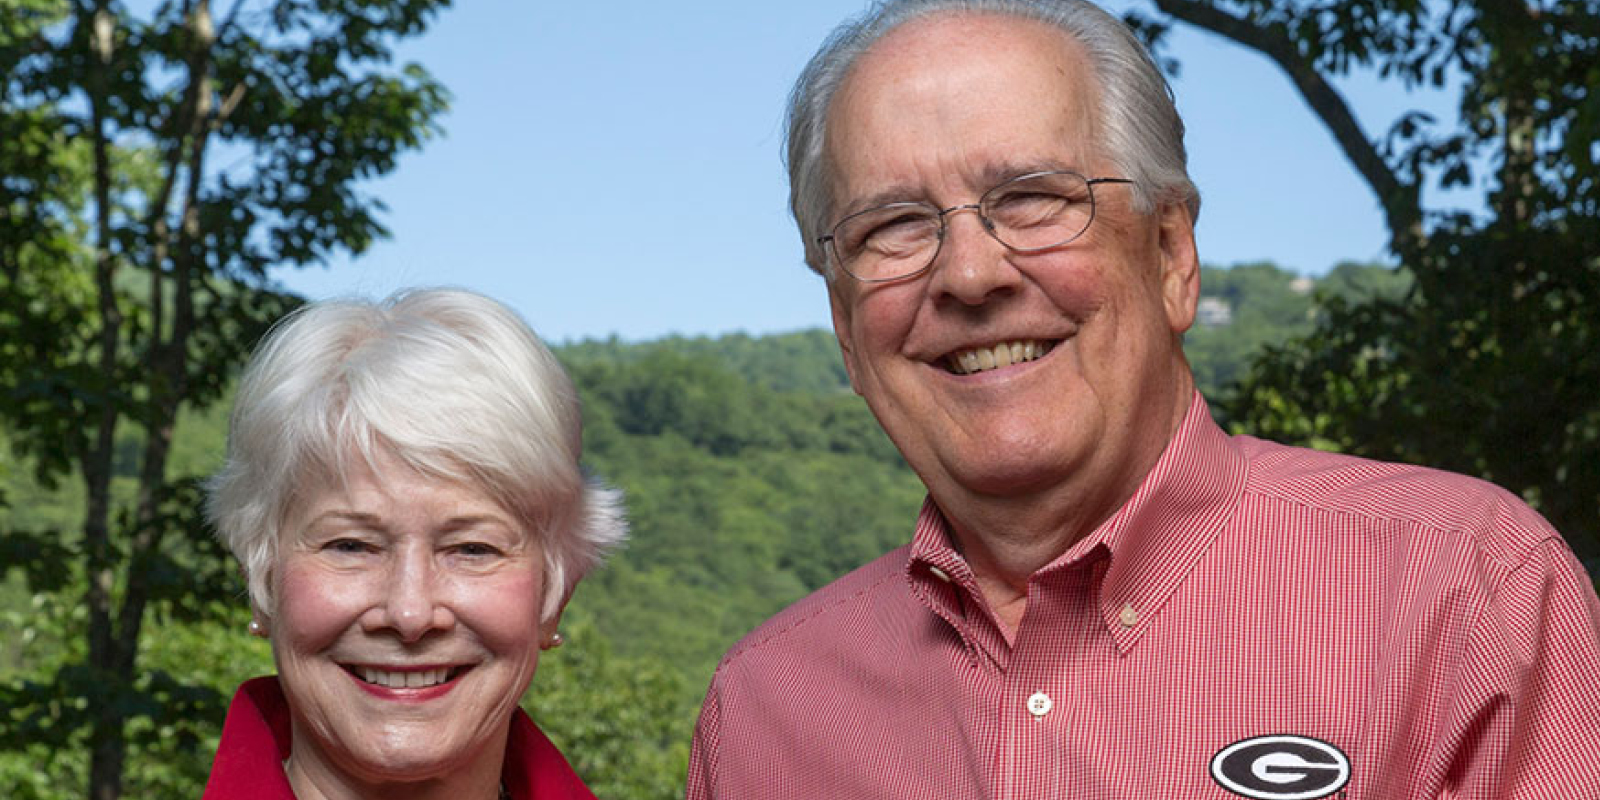 Lynne and Charles Knapp smiling and looking at the camera in front of a green landscape